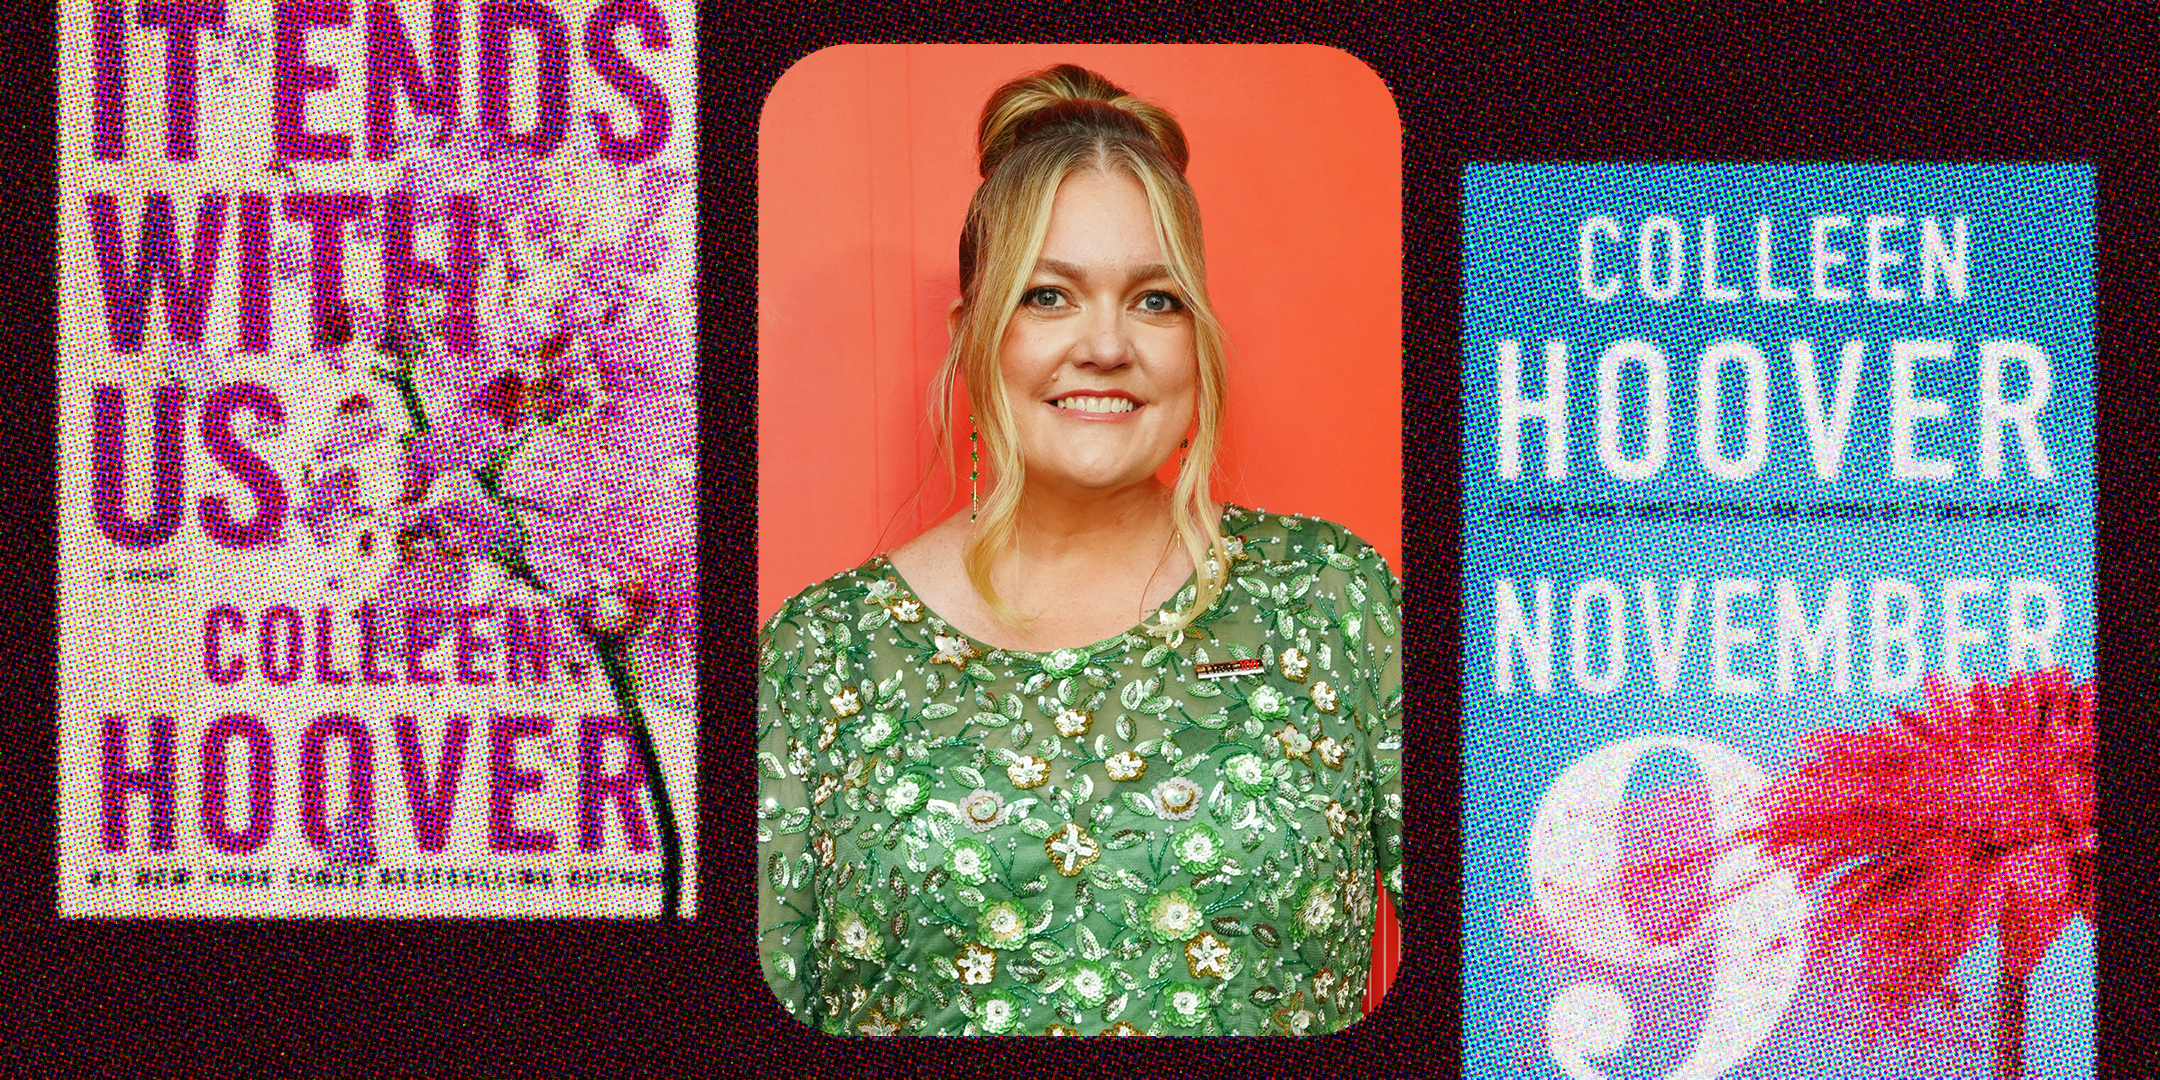 24 Best Colleen Hoover Books In Order - G+T